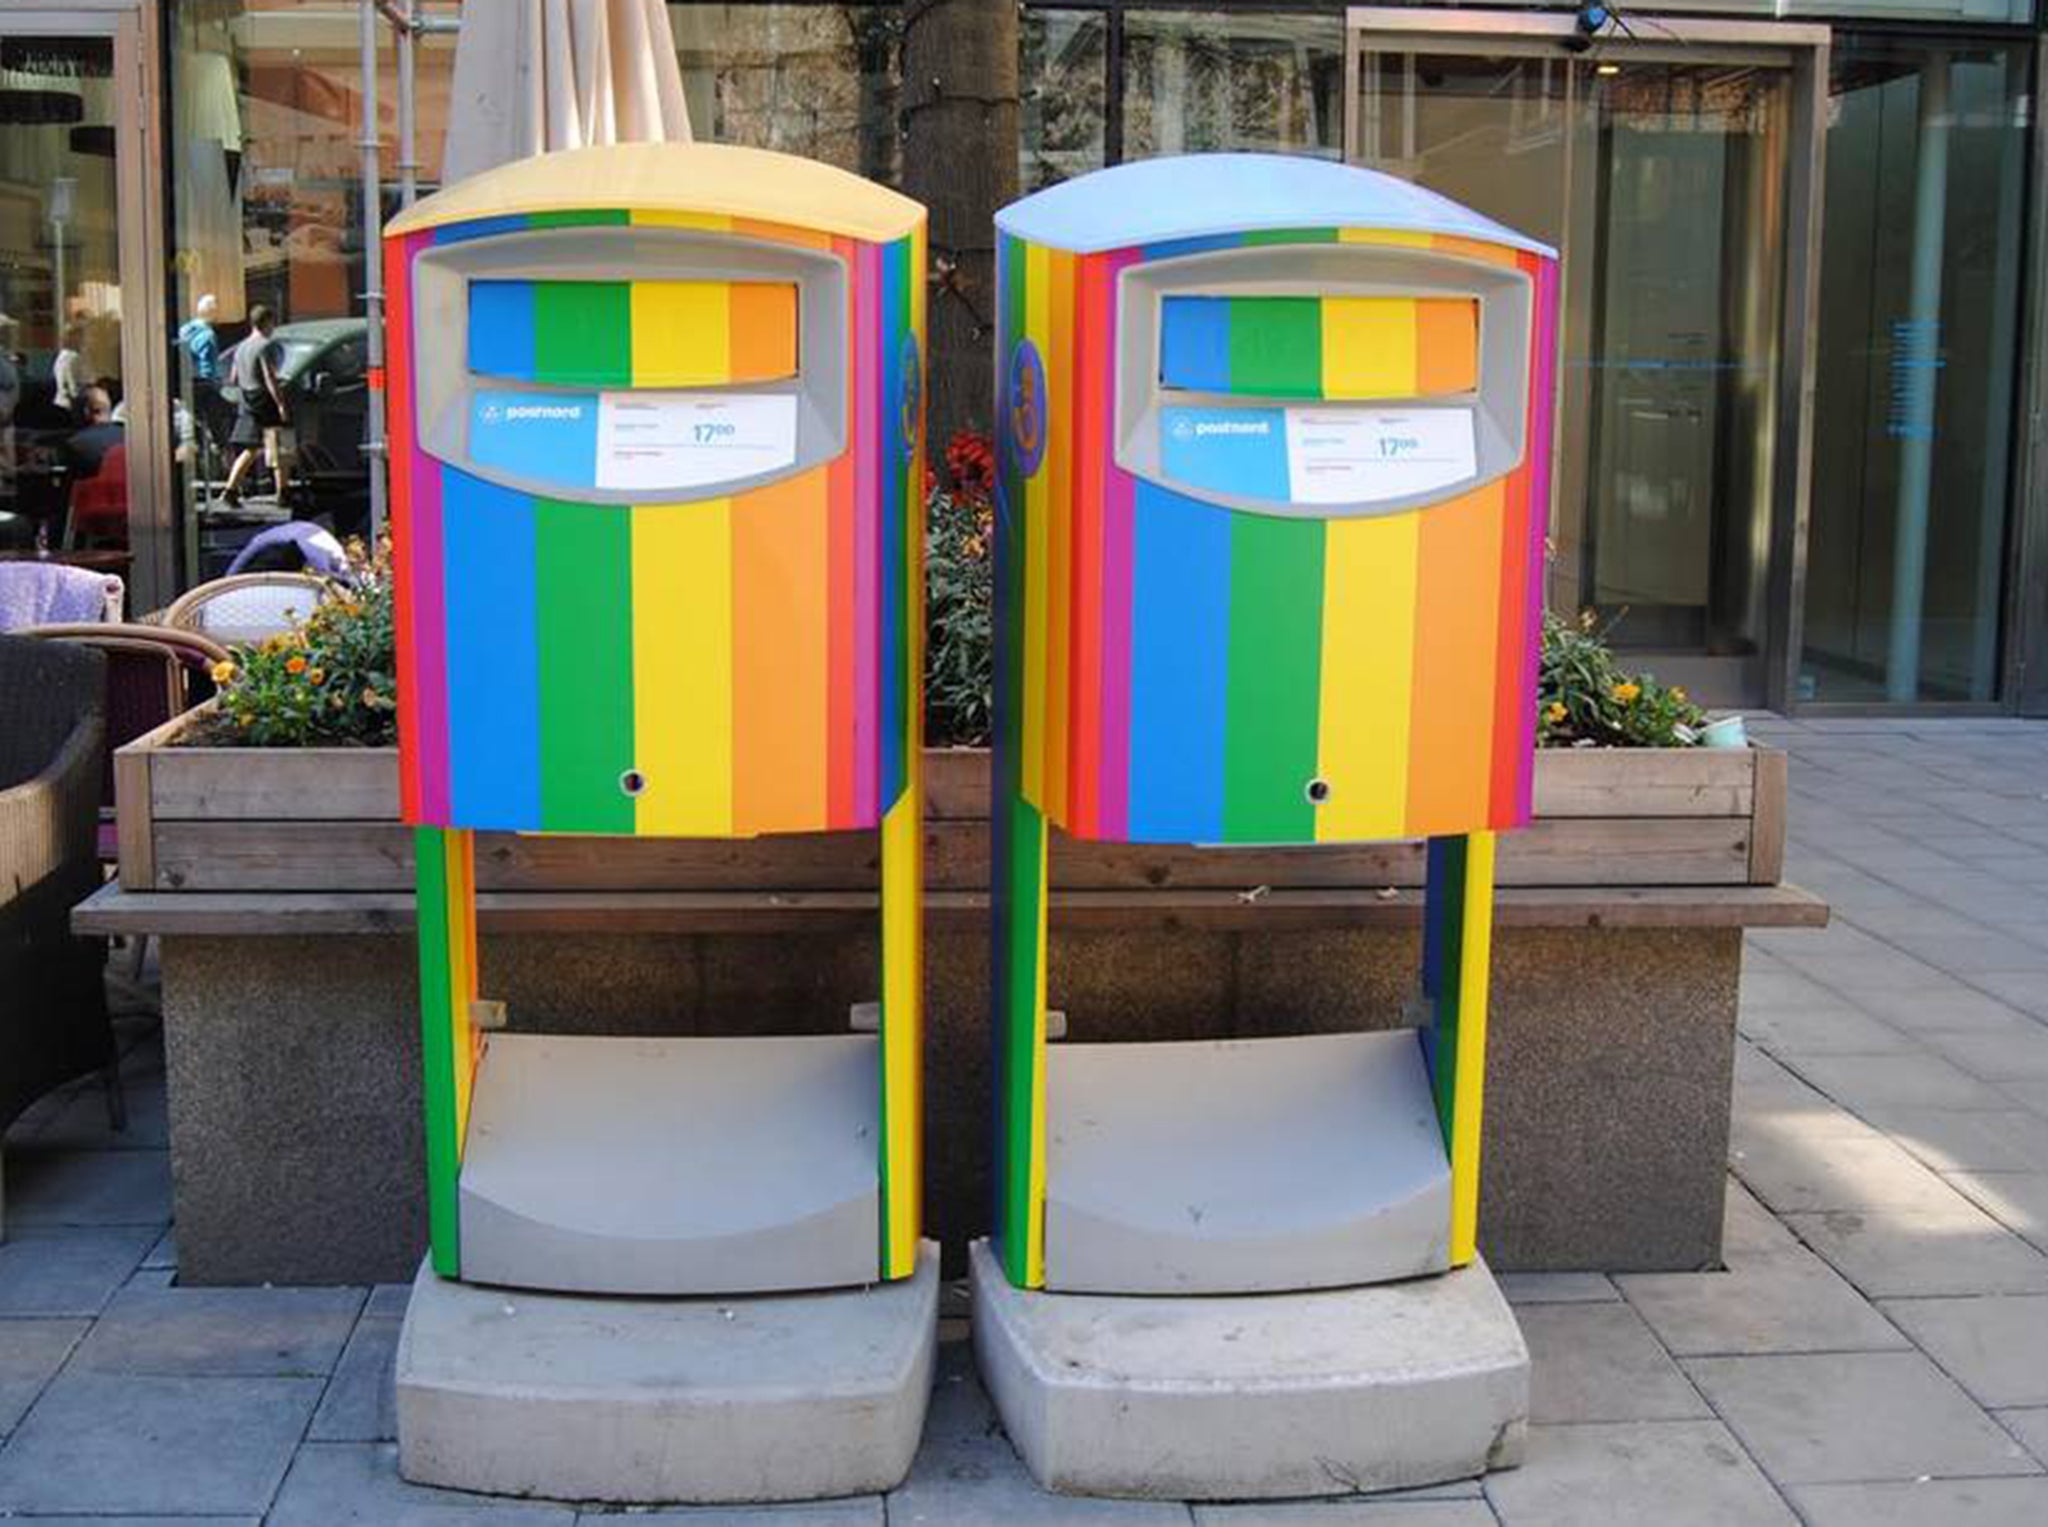 The traditional yellow and blue will be replaced with these rainbow postboxes in seven locations